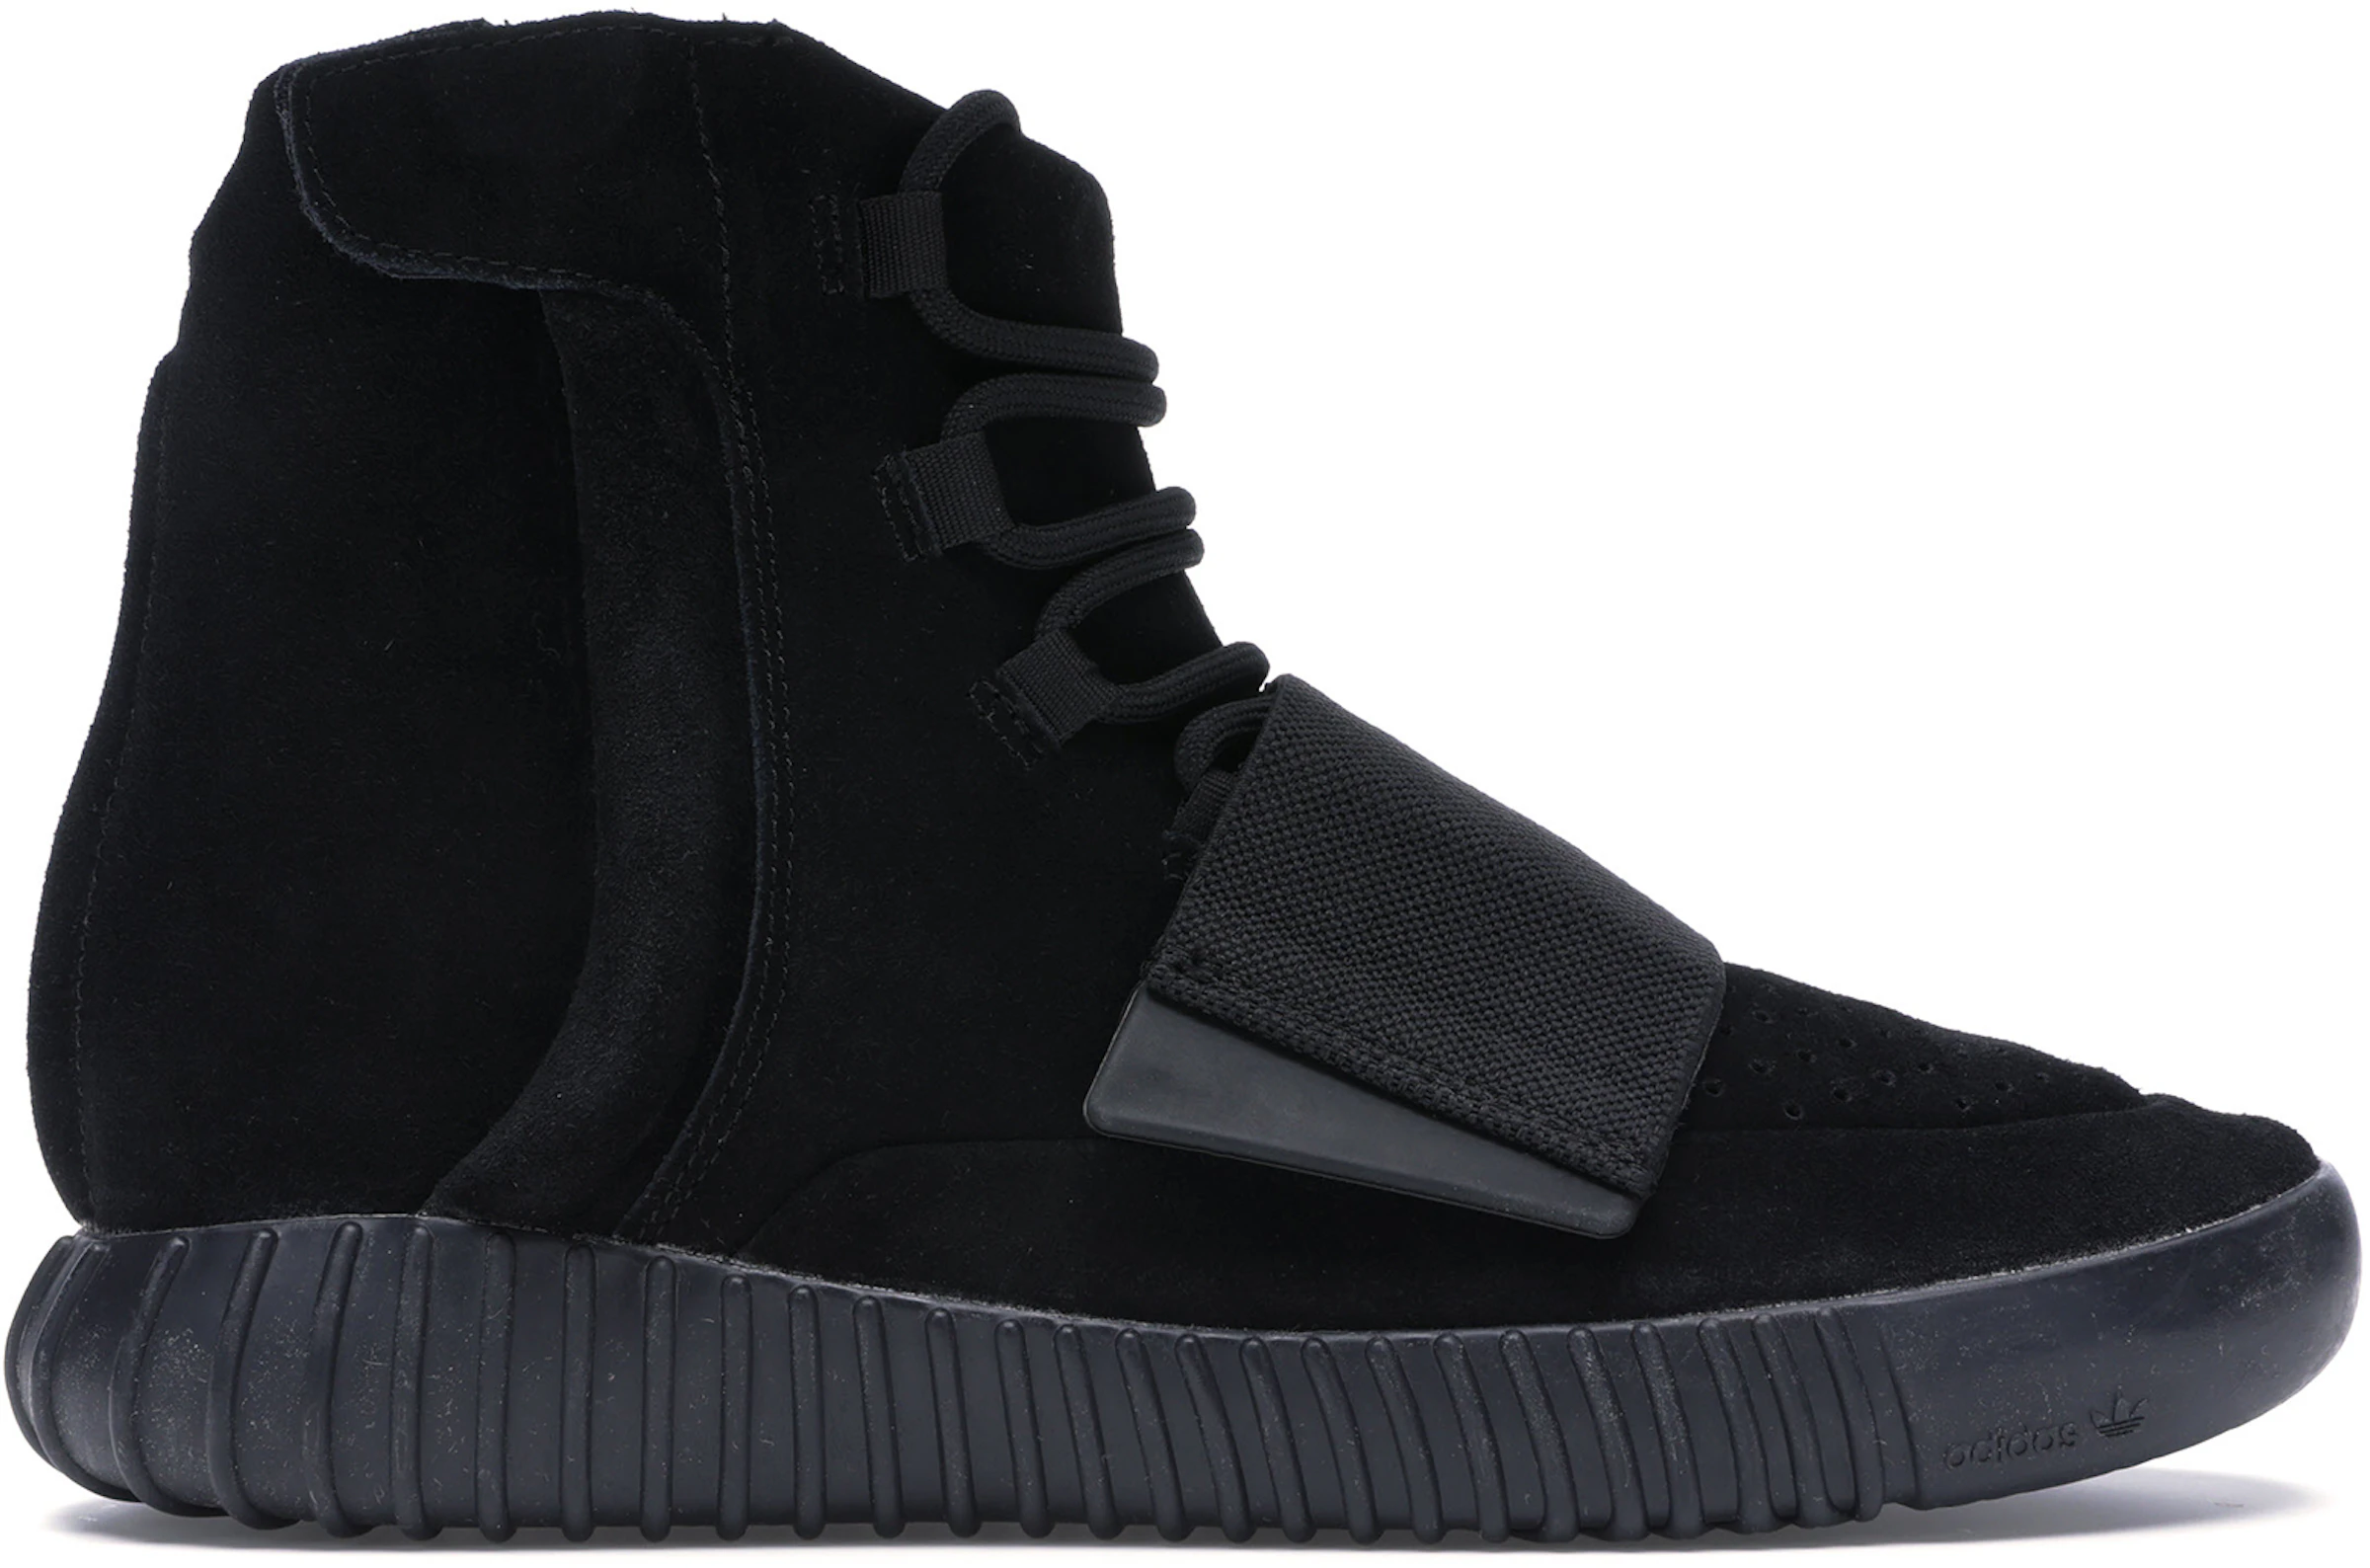 Adidas Yeezy 750 Boost Shoes By Kanye West Presented In New York | vlr ...